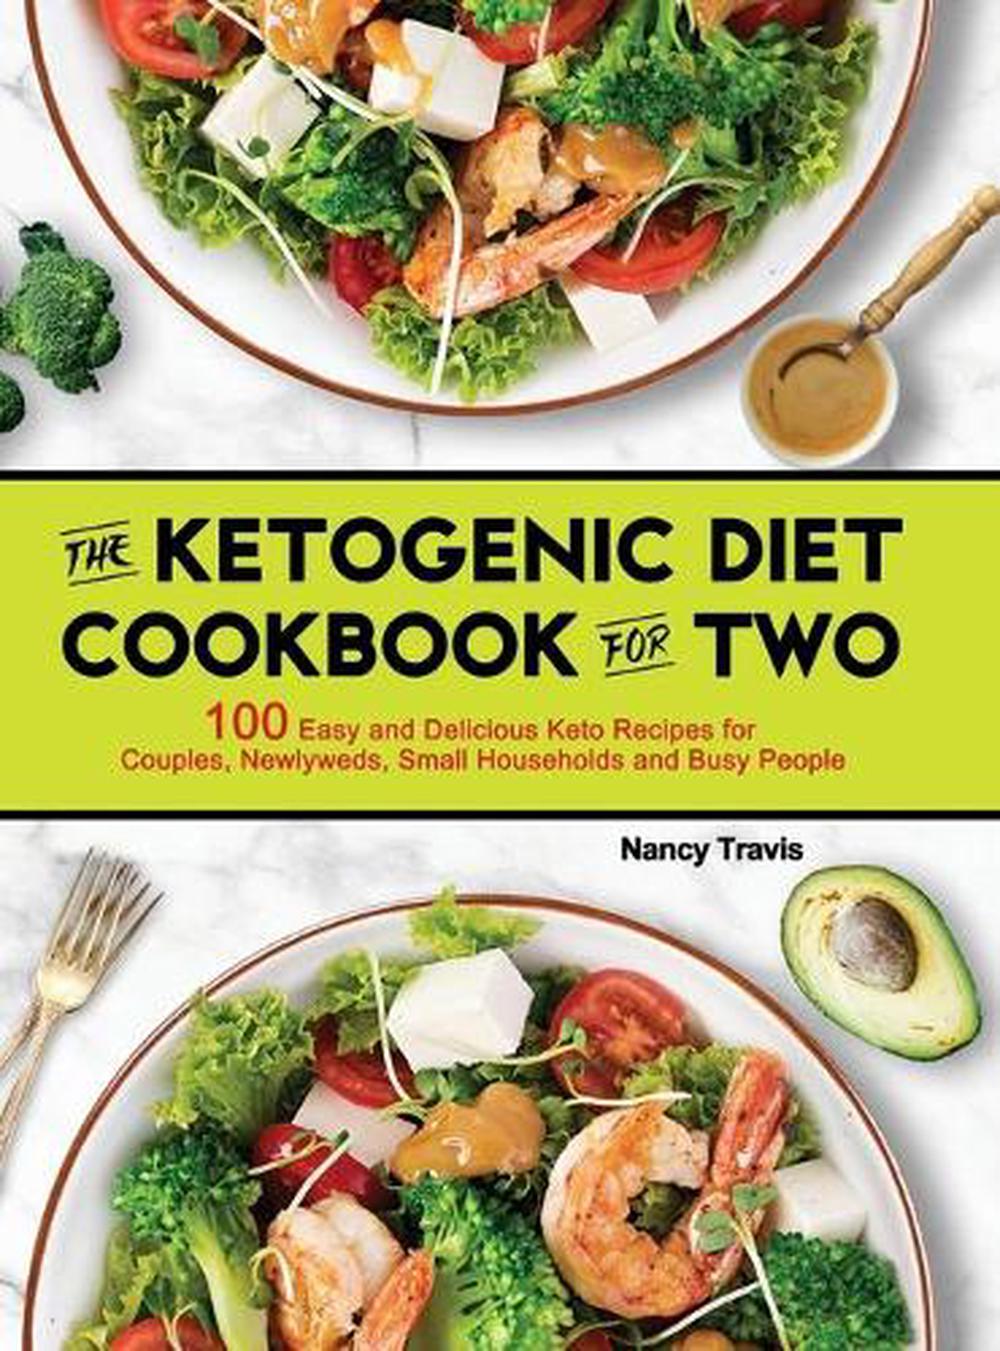 Keto Diet Cookbook for Two by Travis Nancy Nancy (English) Hardcover ...